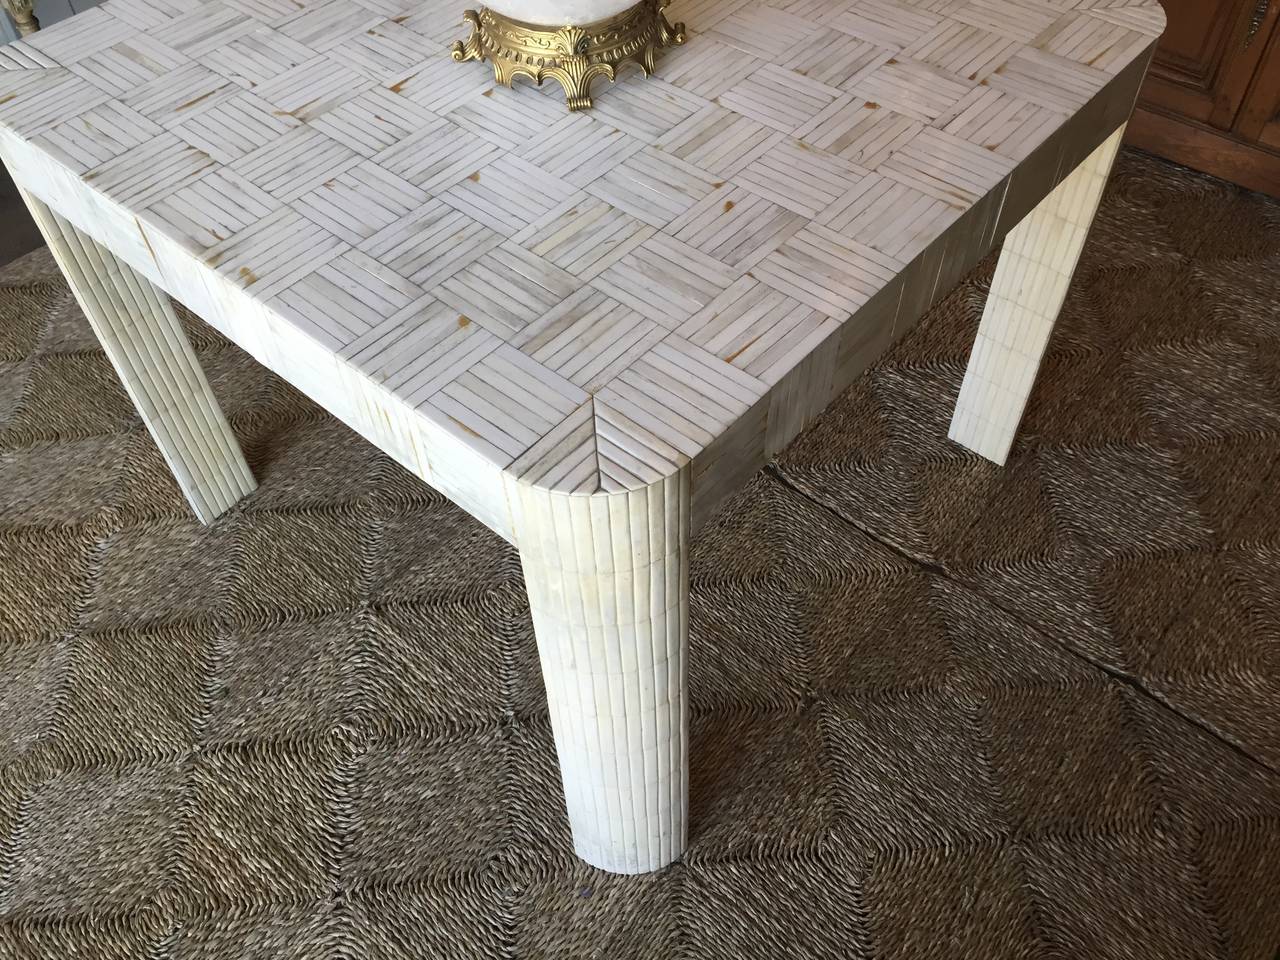 American Karl Springer Style Table with Tessellated Polished Bone Tiles